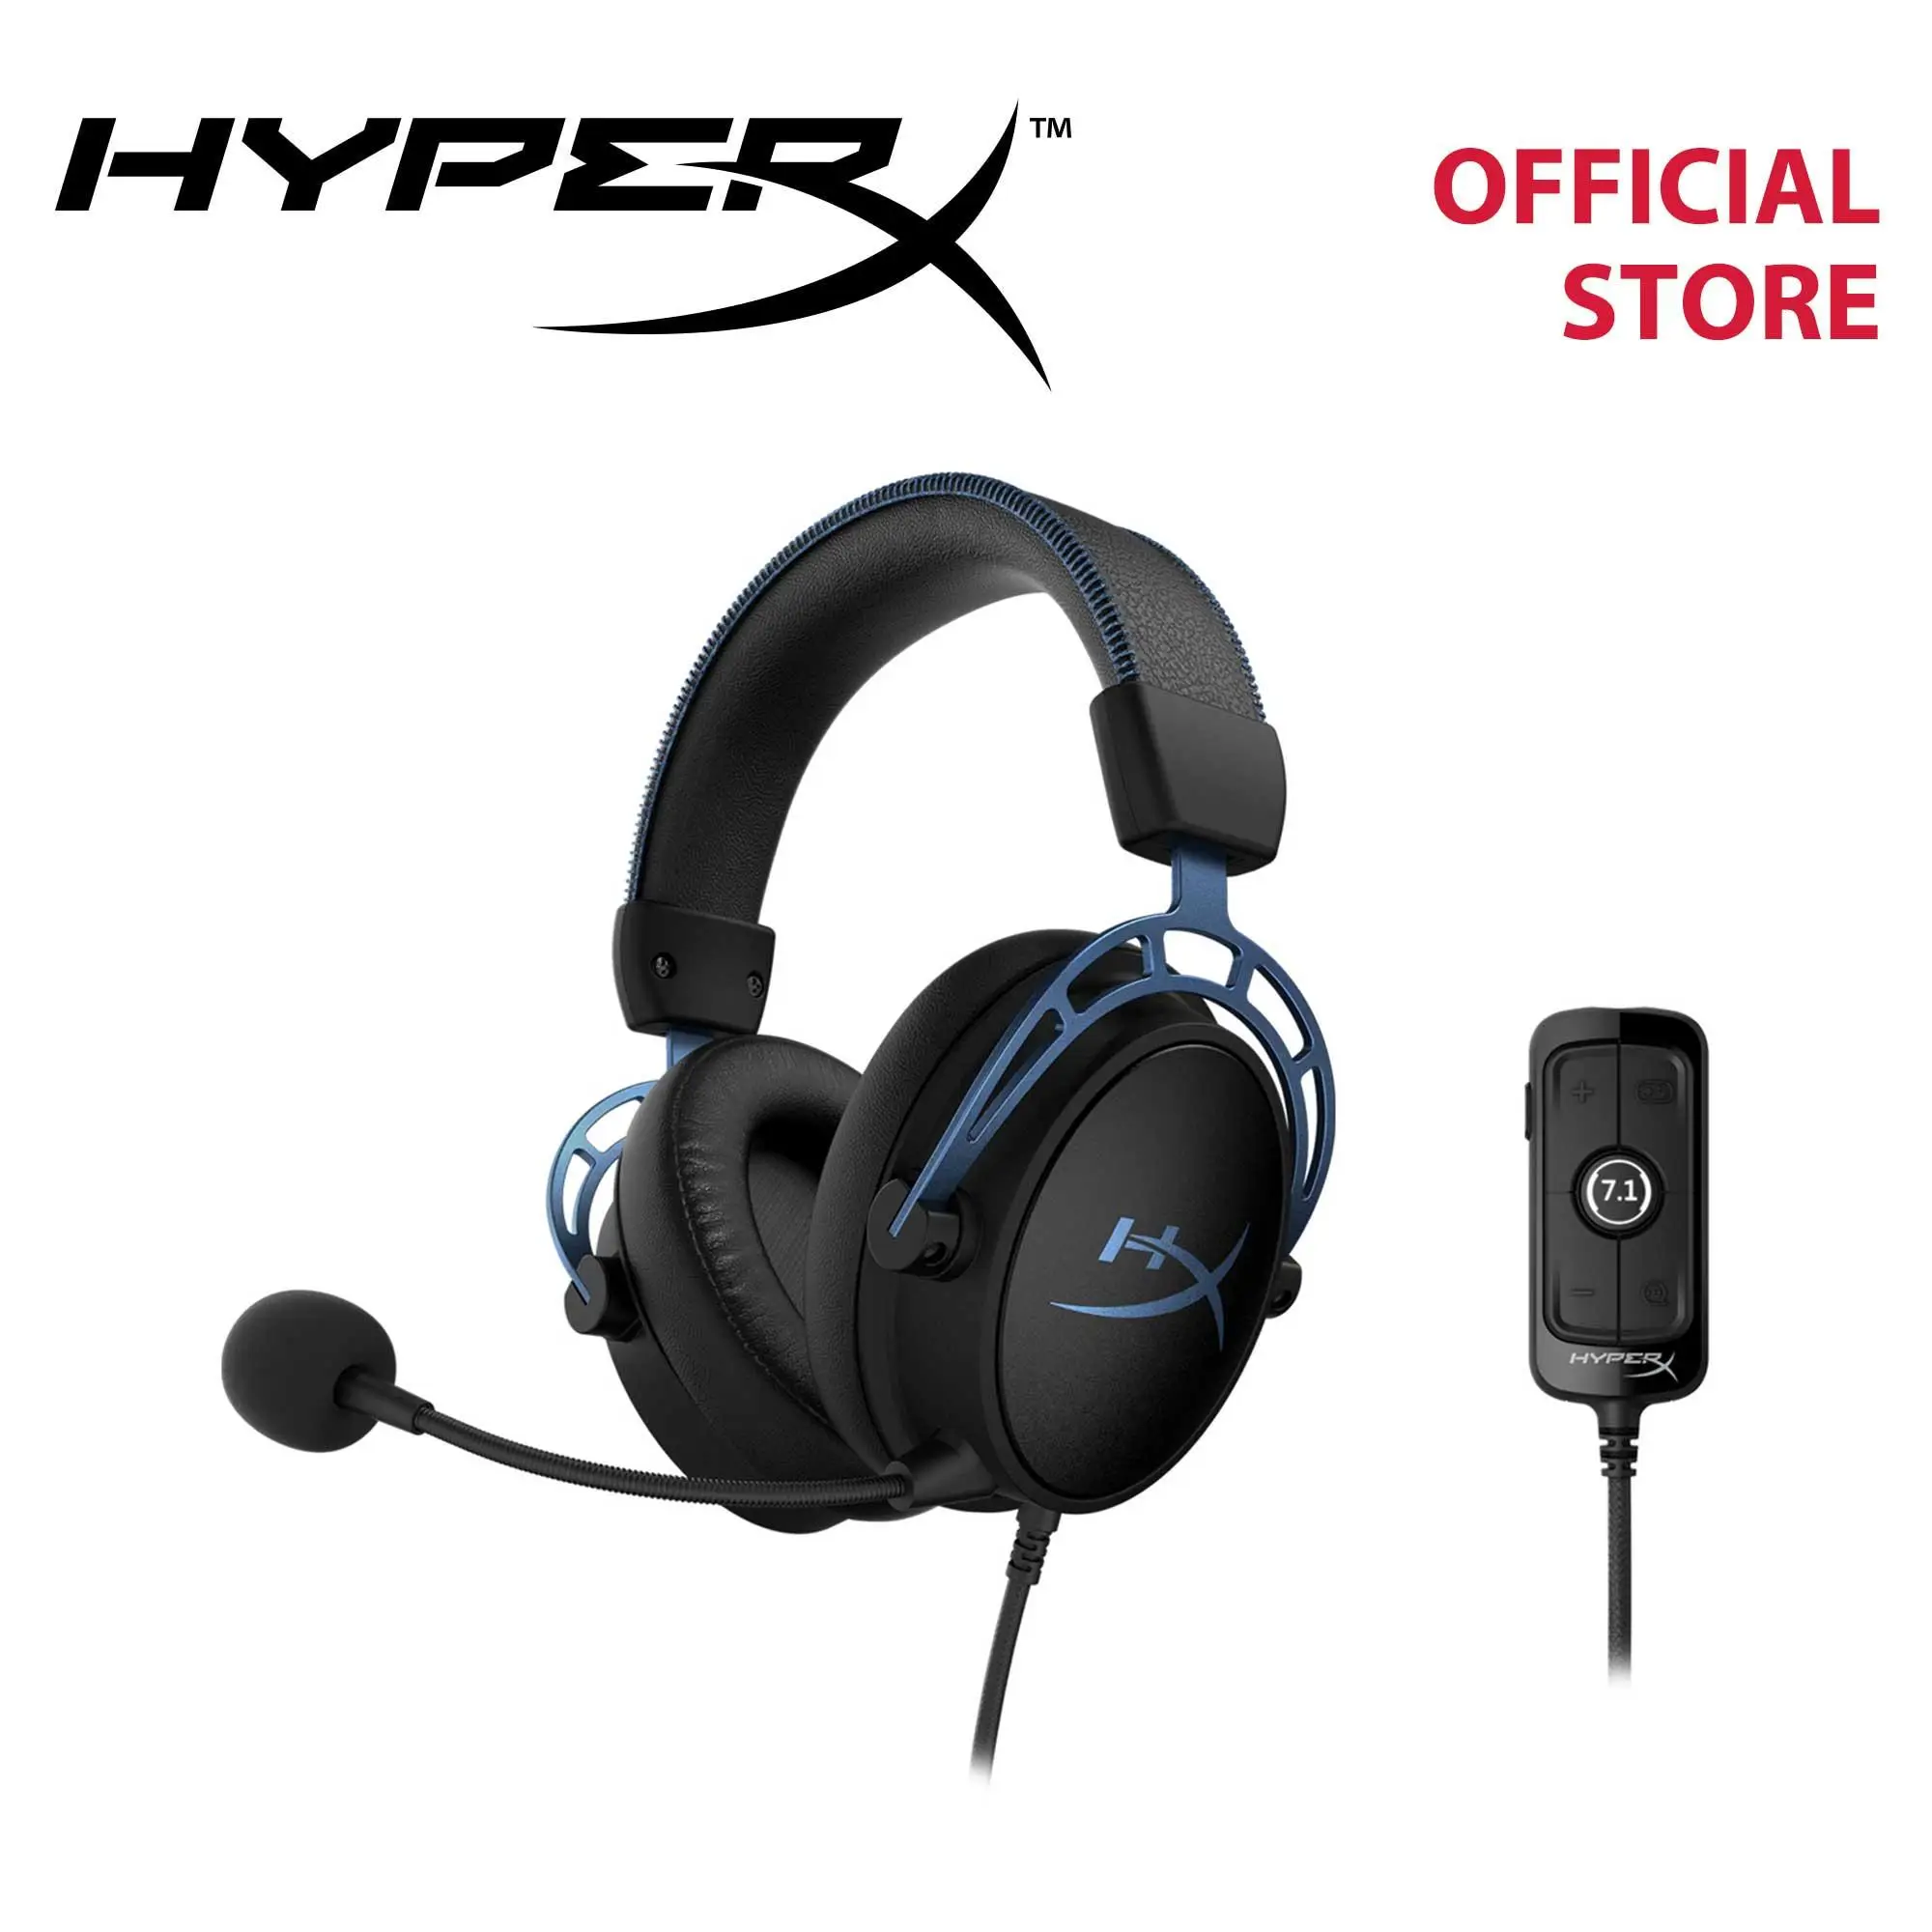 

HyperX Cloud Alpha S USB Gaming Headset with 7.1 Surround Sound for PC (HX-HSCAS-BL/WW / 4P5L3AA)